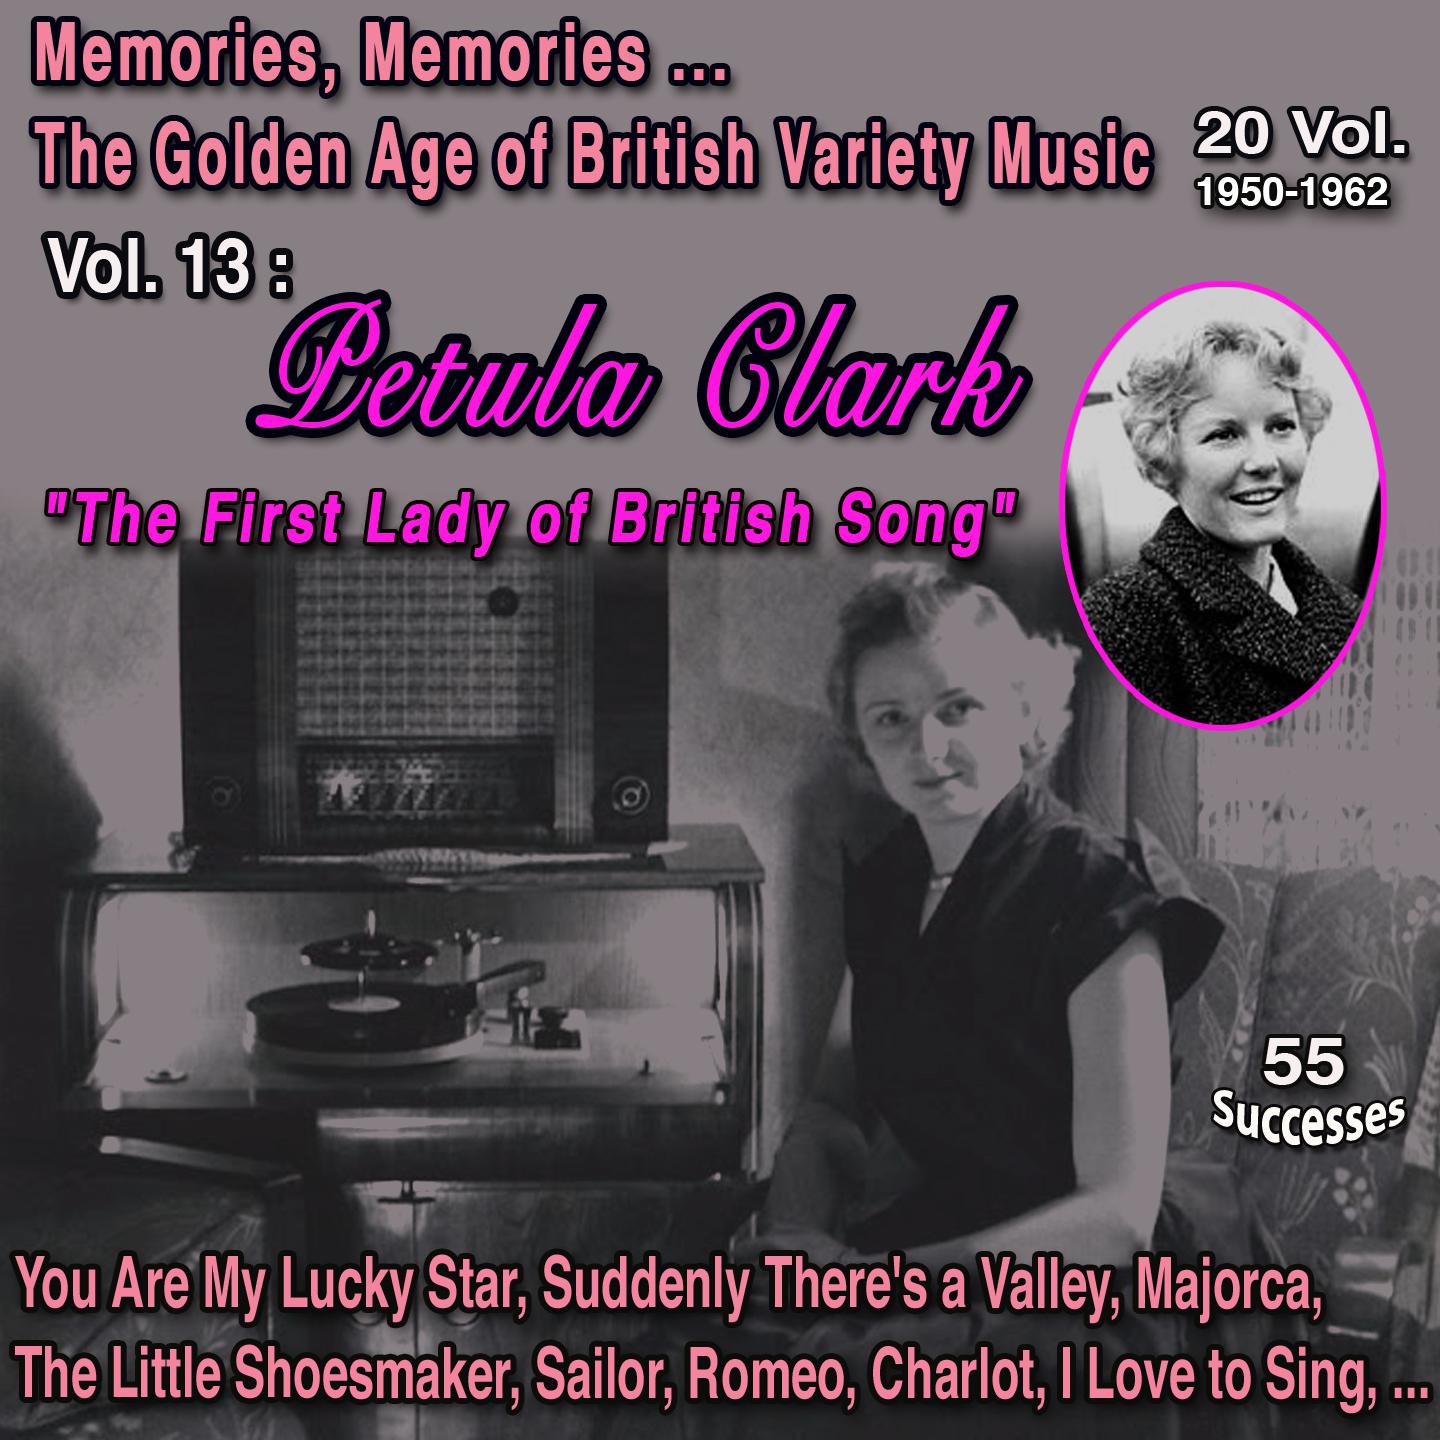 Постер альбома Memories, Memories... The Golden Age of British Variety Music 20 Vol. 1950-1962 Vol. 13 : Petula Clark "The First Lady of British Song"